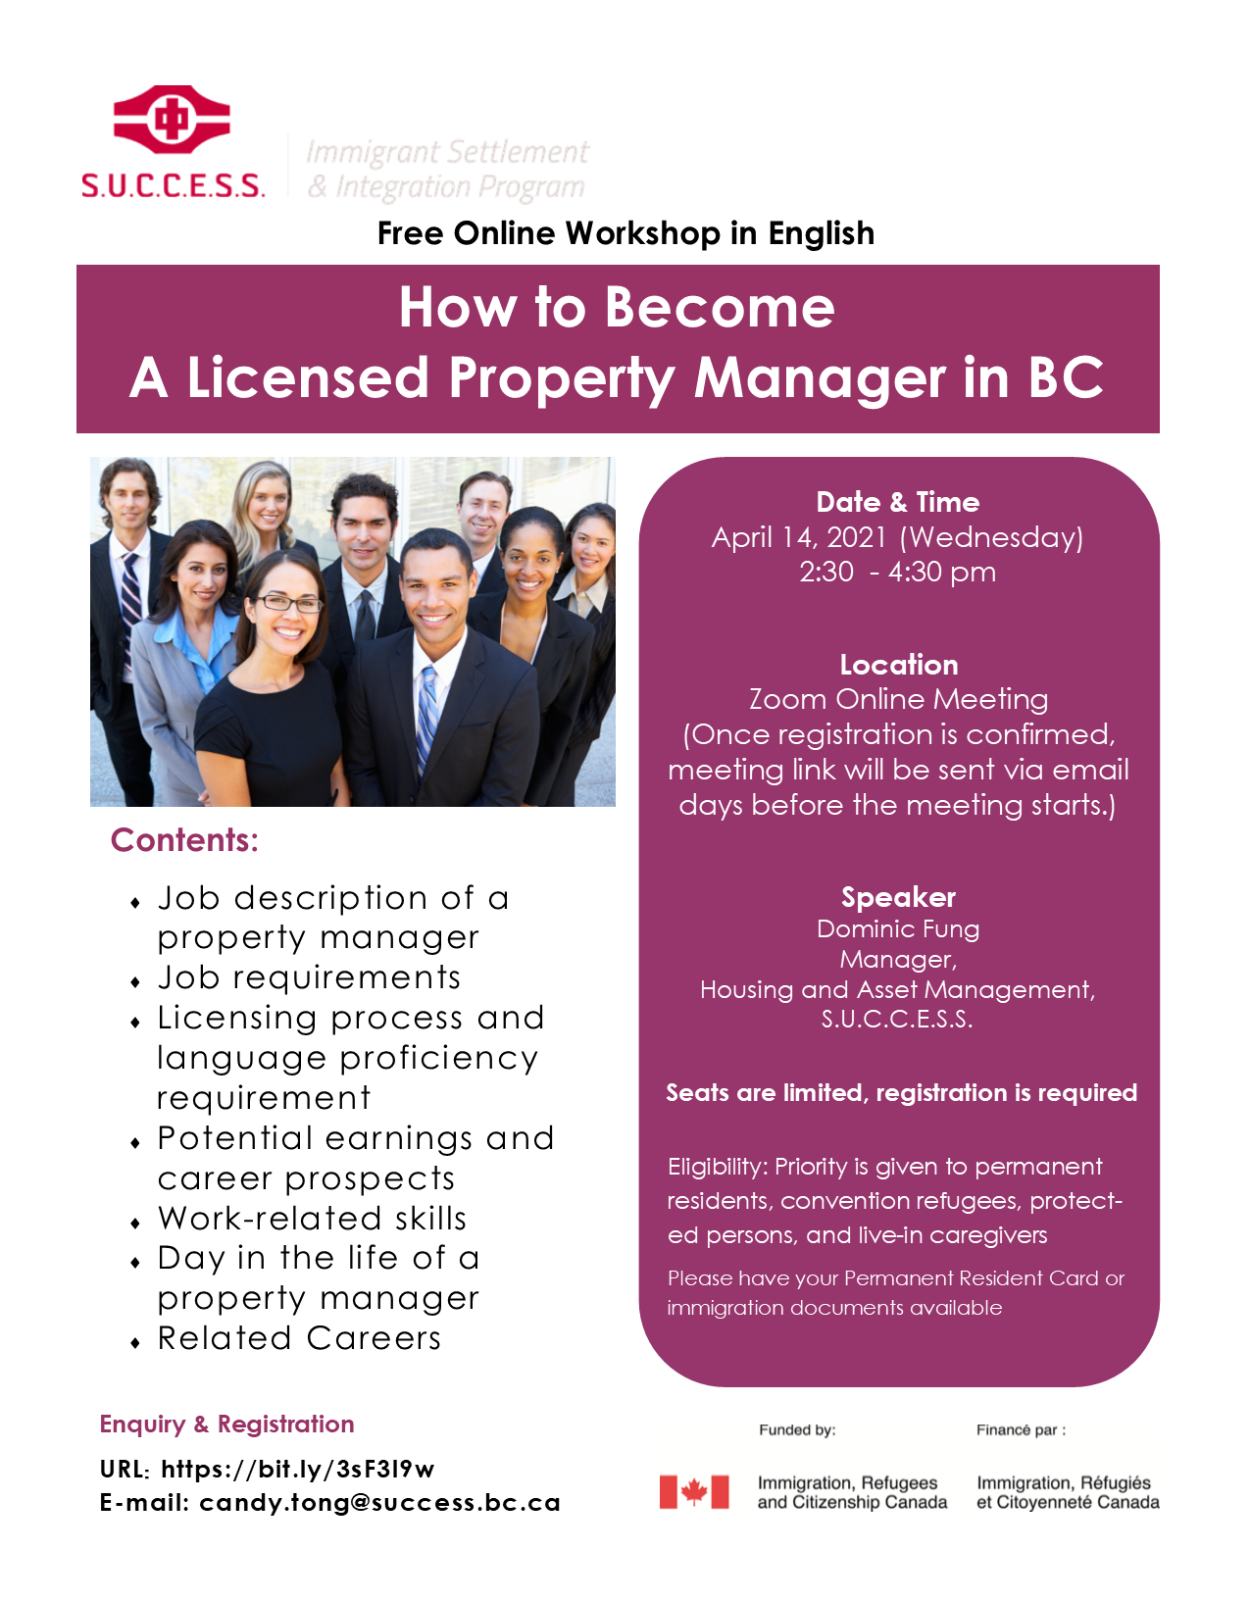 210408133816_ - How to Become a Licensed Property Manager in BC - (final).png